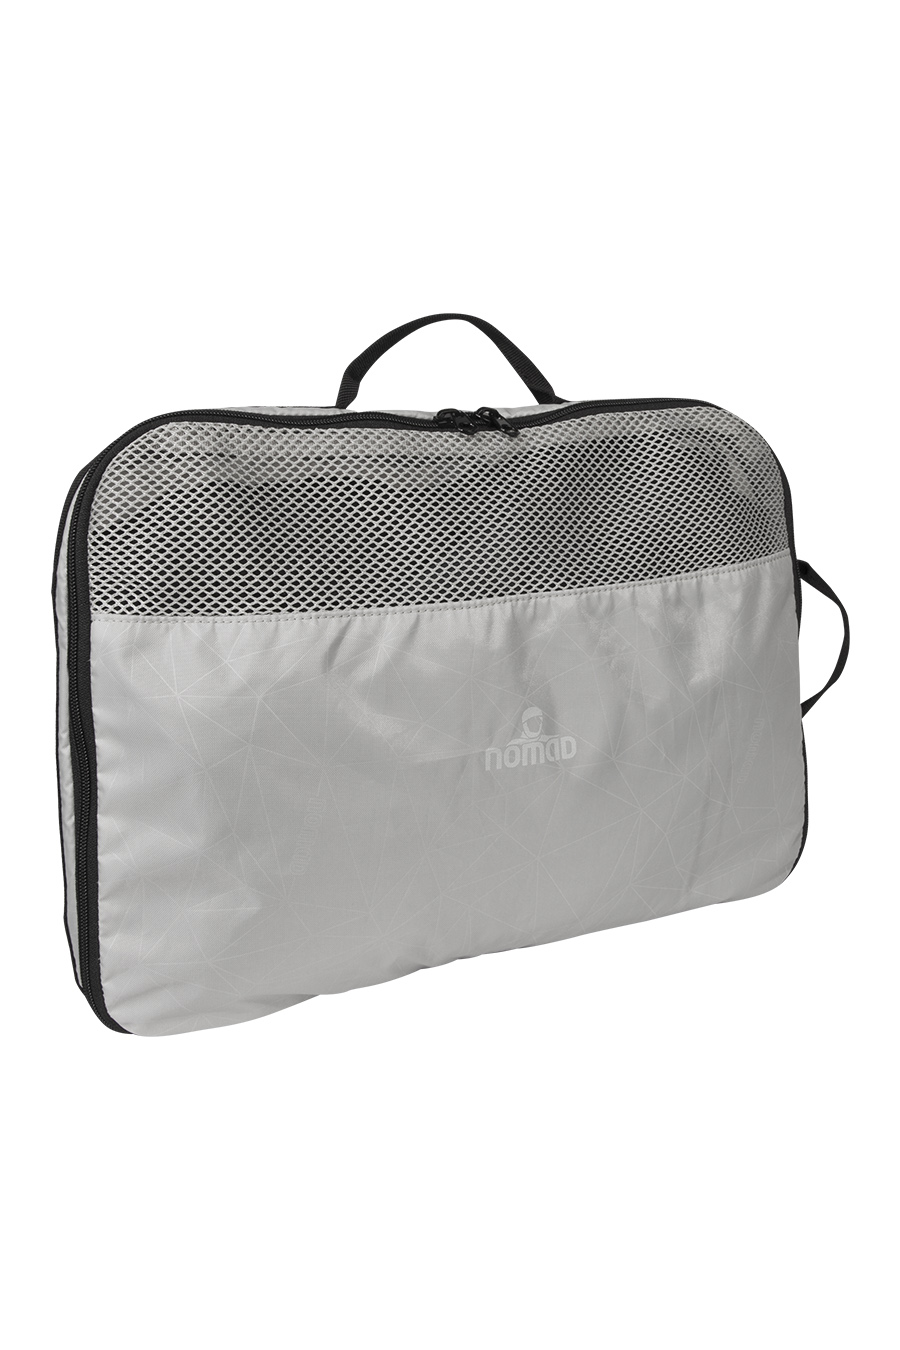 NOMAD® - Packing Cube 5 L